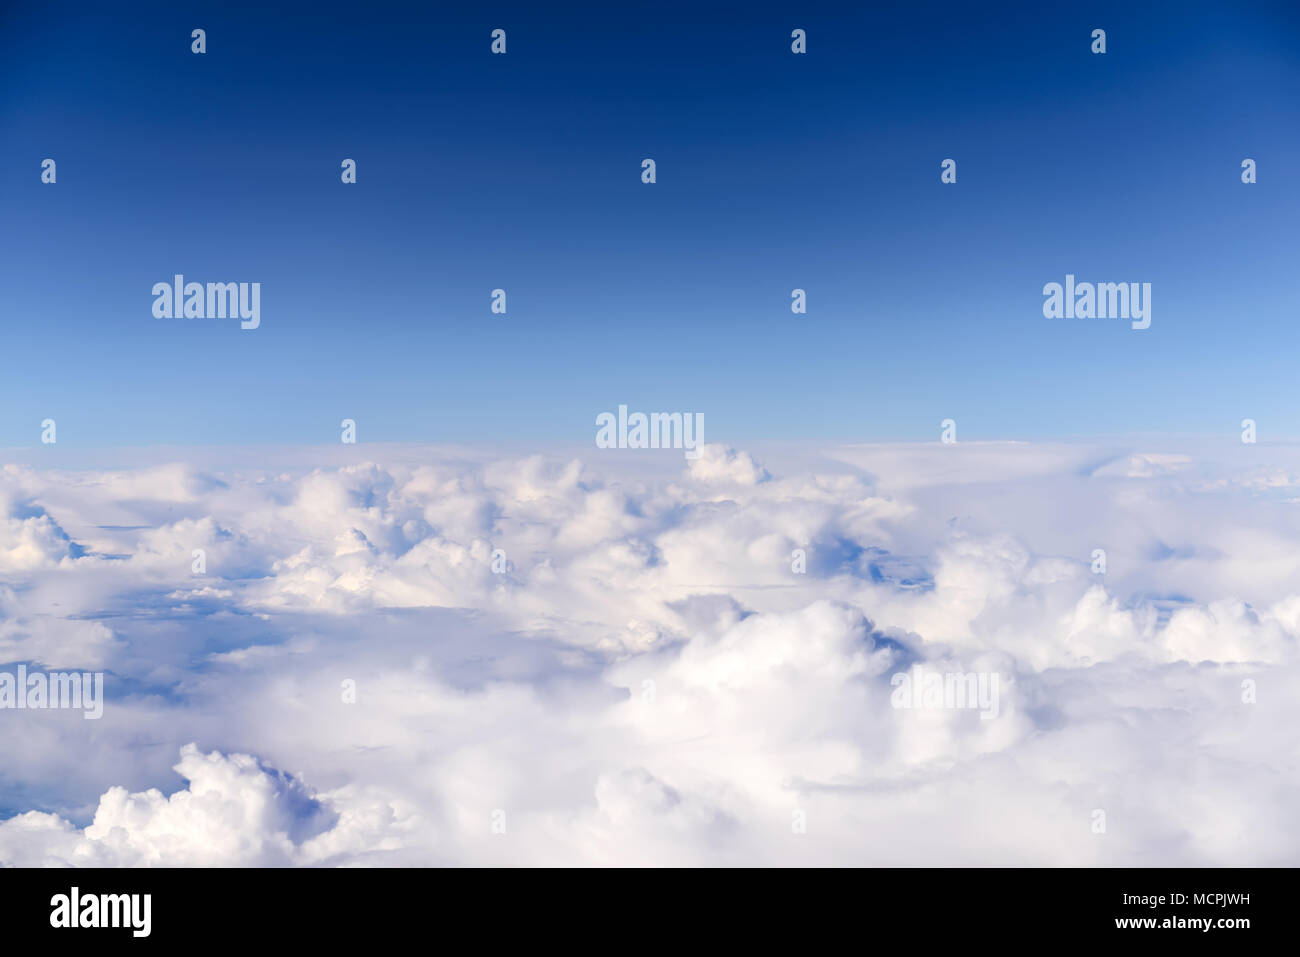 Sky and clouds background Stock Photo